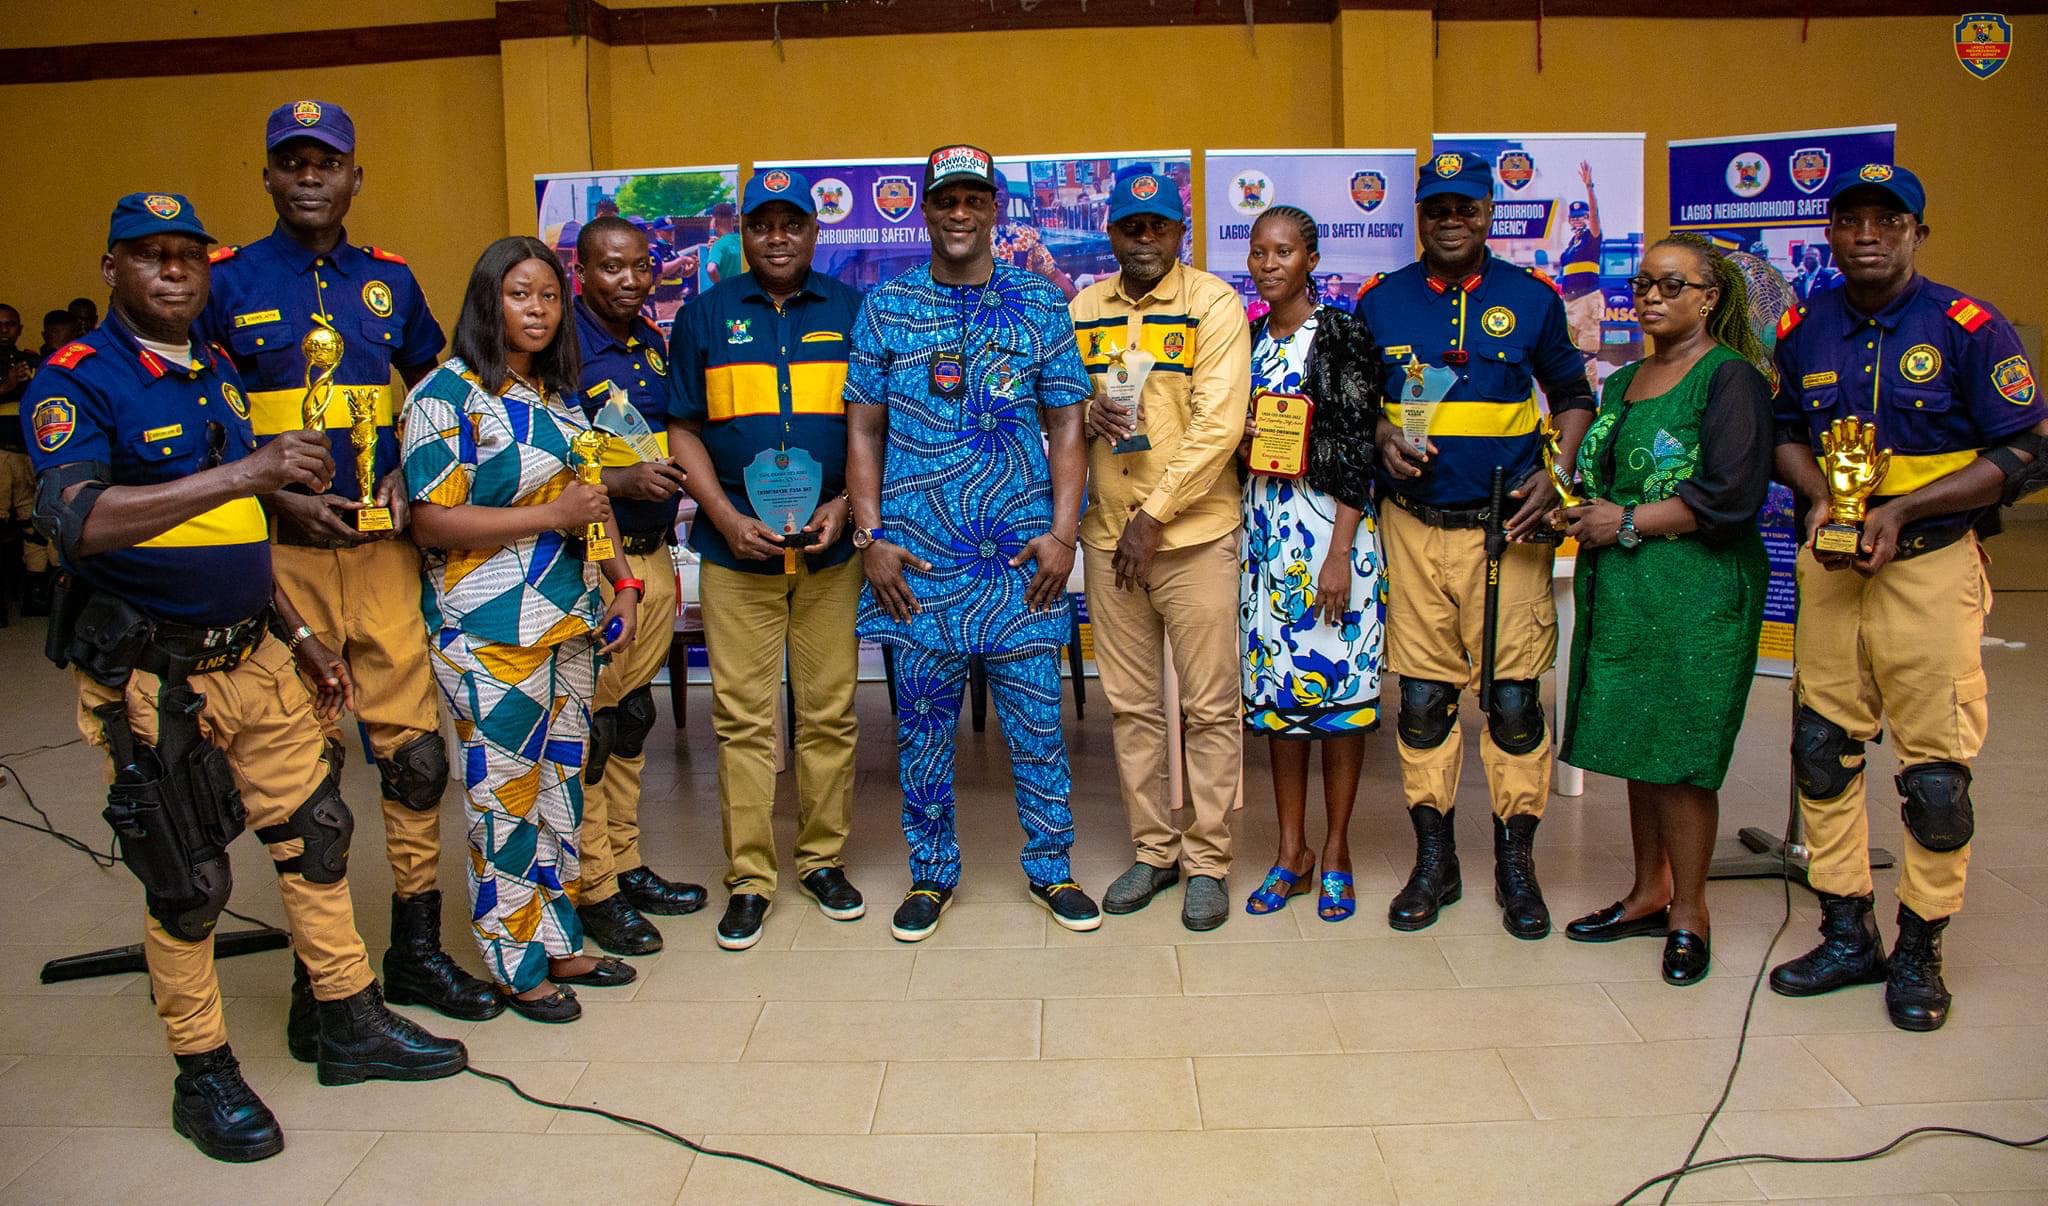 The General Manager of the Lagos State Neighborhood Safety Agency Prince Dr Ifalade Oyekan has commended it's hardworking staff for bearing the Greater Lagos vision aloft.